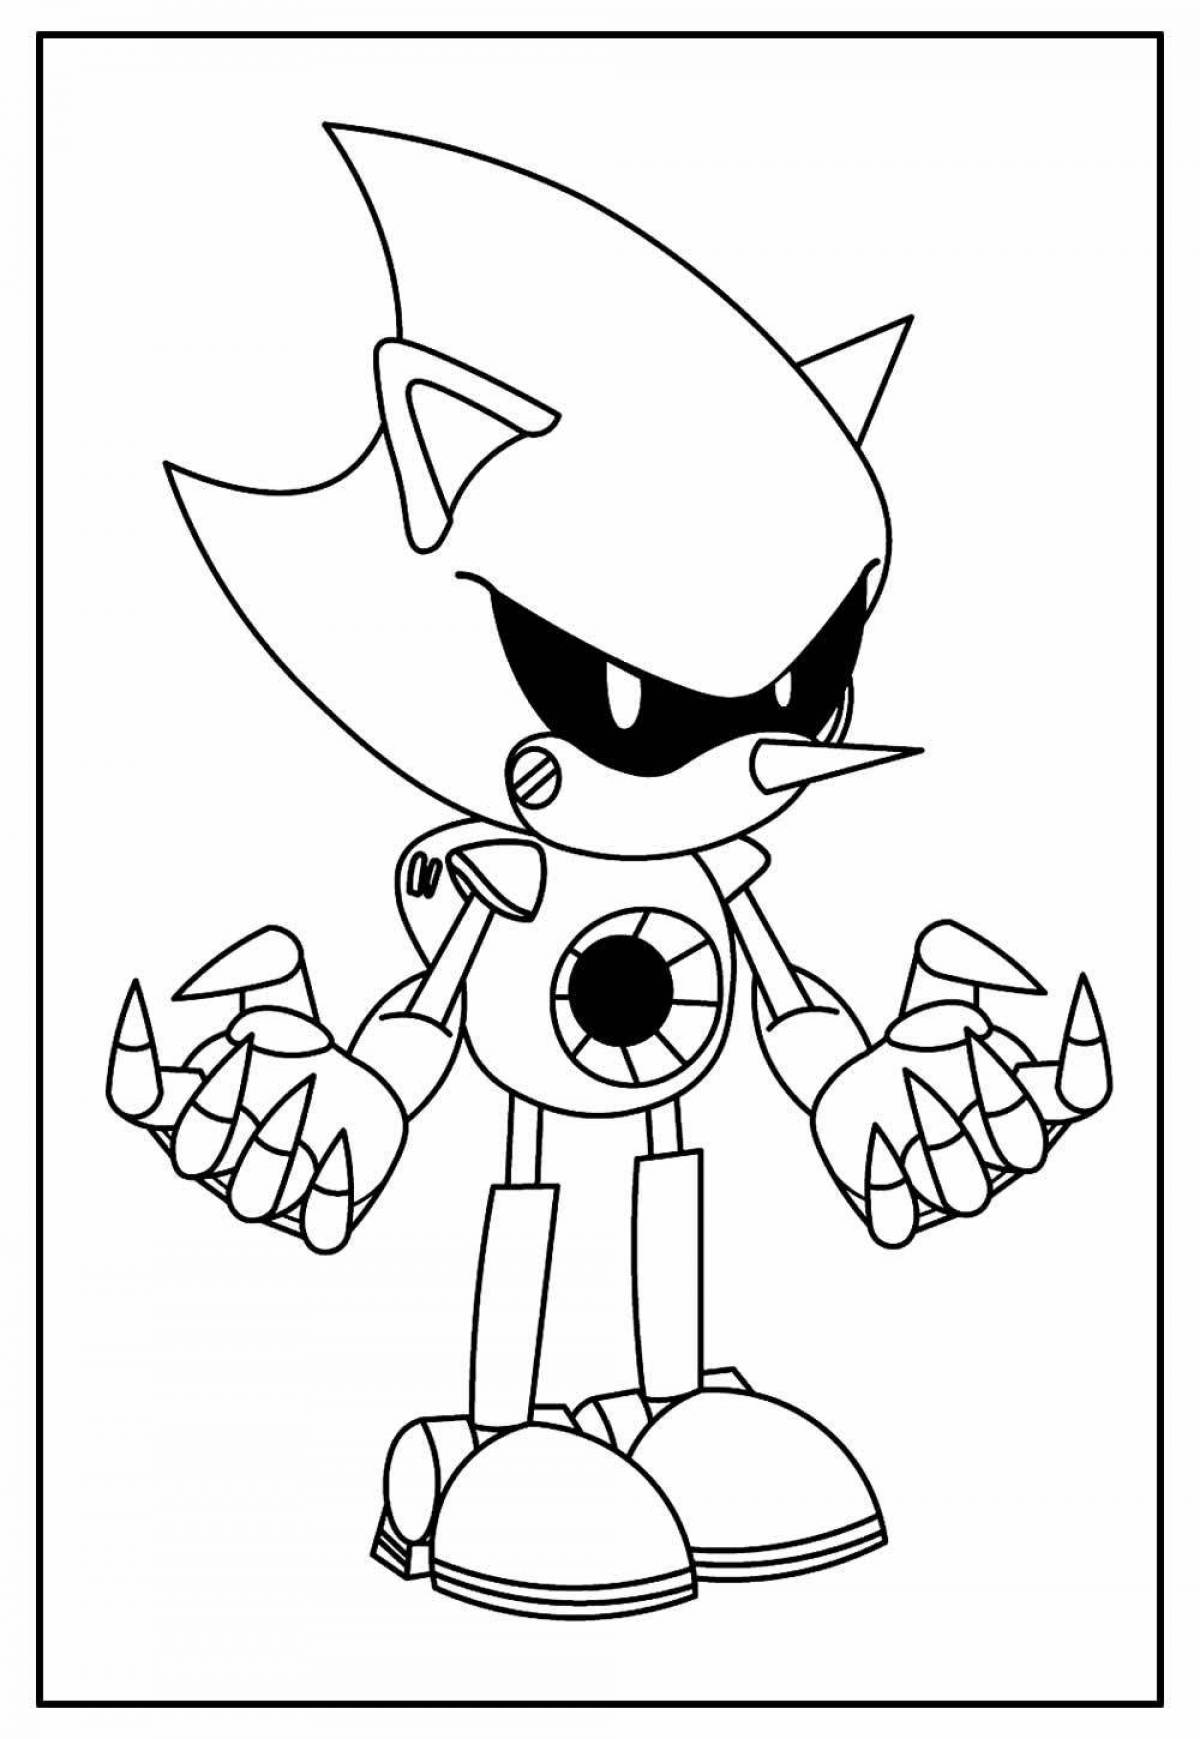 Complex sonic metal coloring